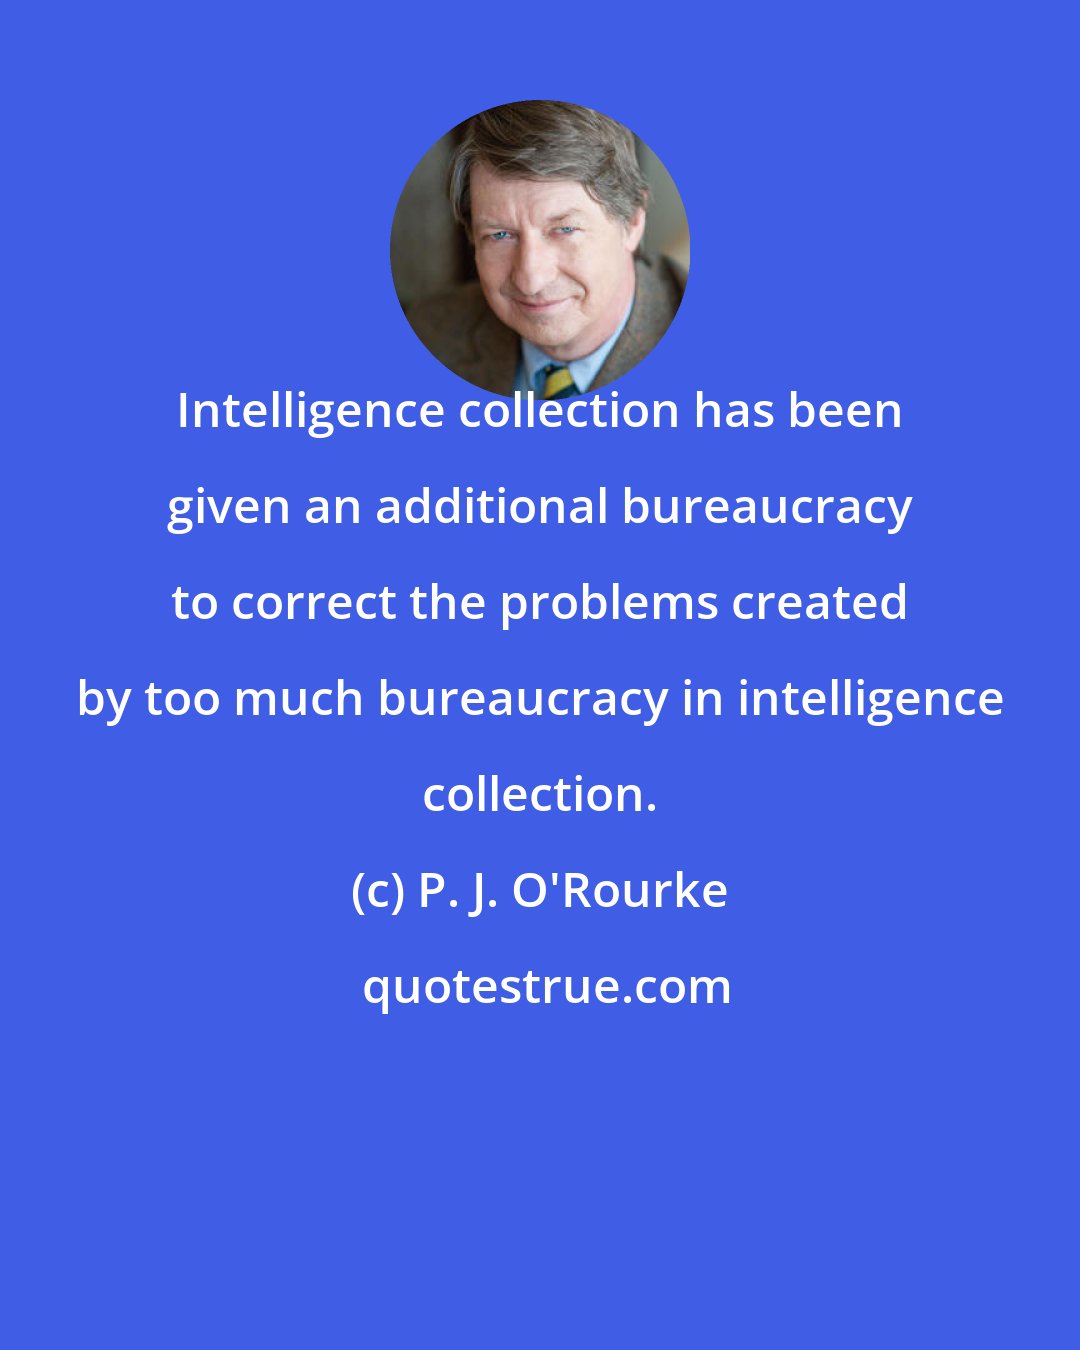 P. J. O'Rourke: Intelligence collection has been given an additional bureaucracy to correct the problems created by too much bureaucracy in intelligence collection.